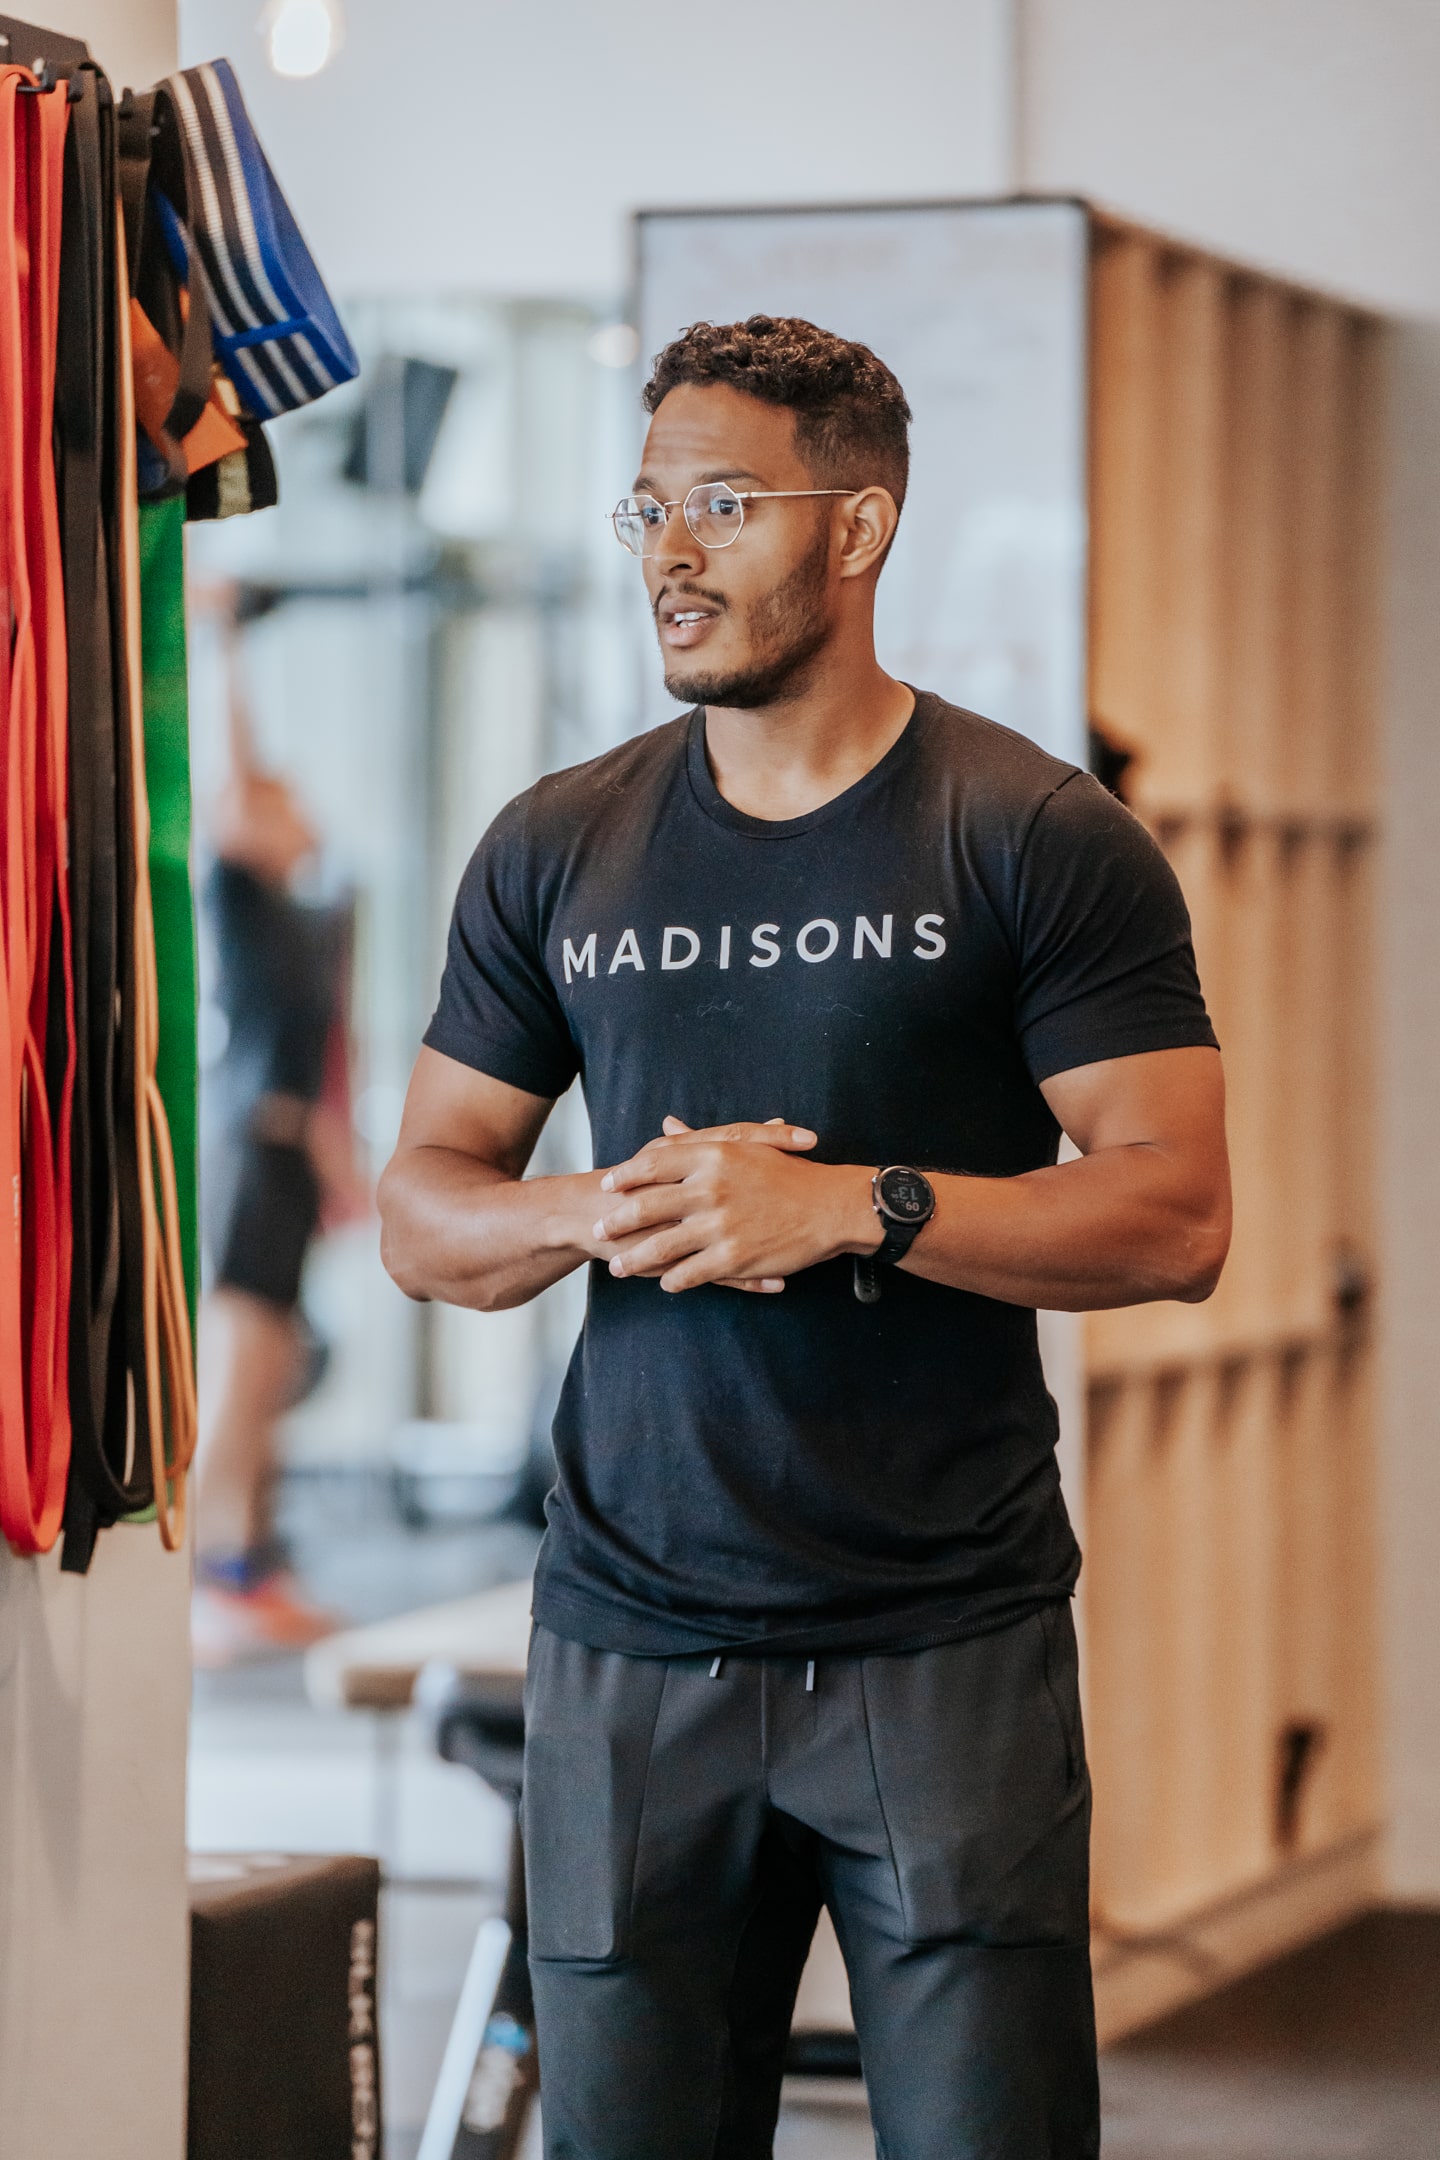 A person wearing a black t-shirt with a Madisons logo on it standing with resistance bands hanging on the wall to his left.